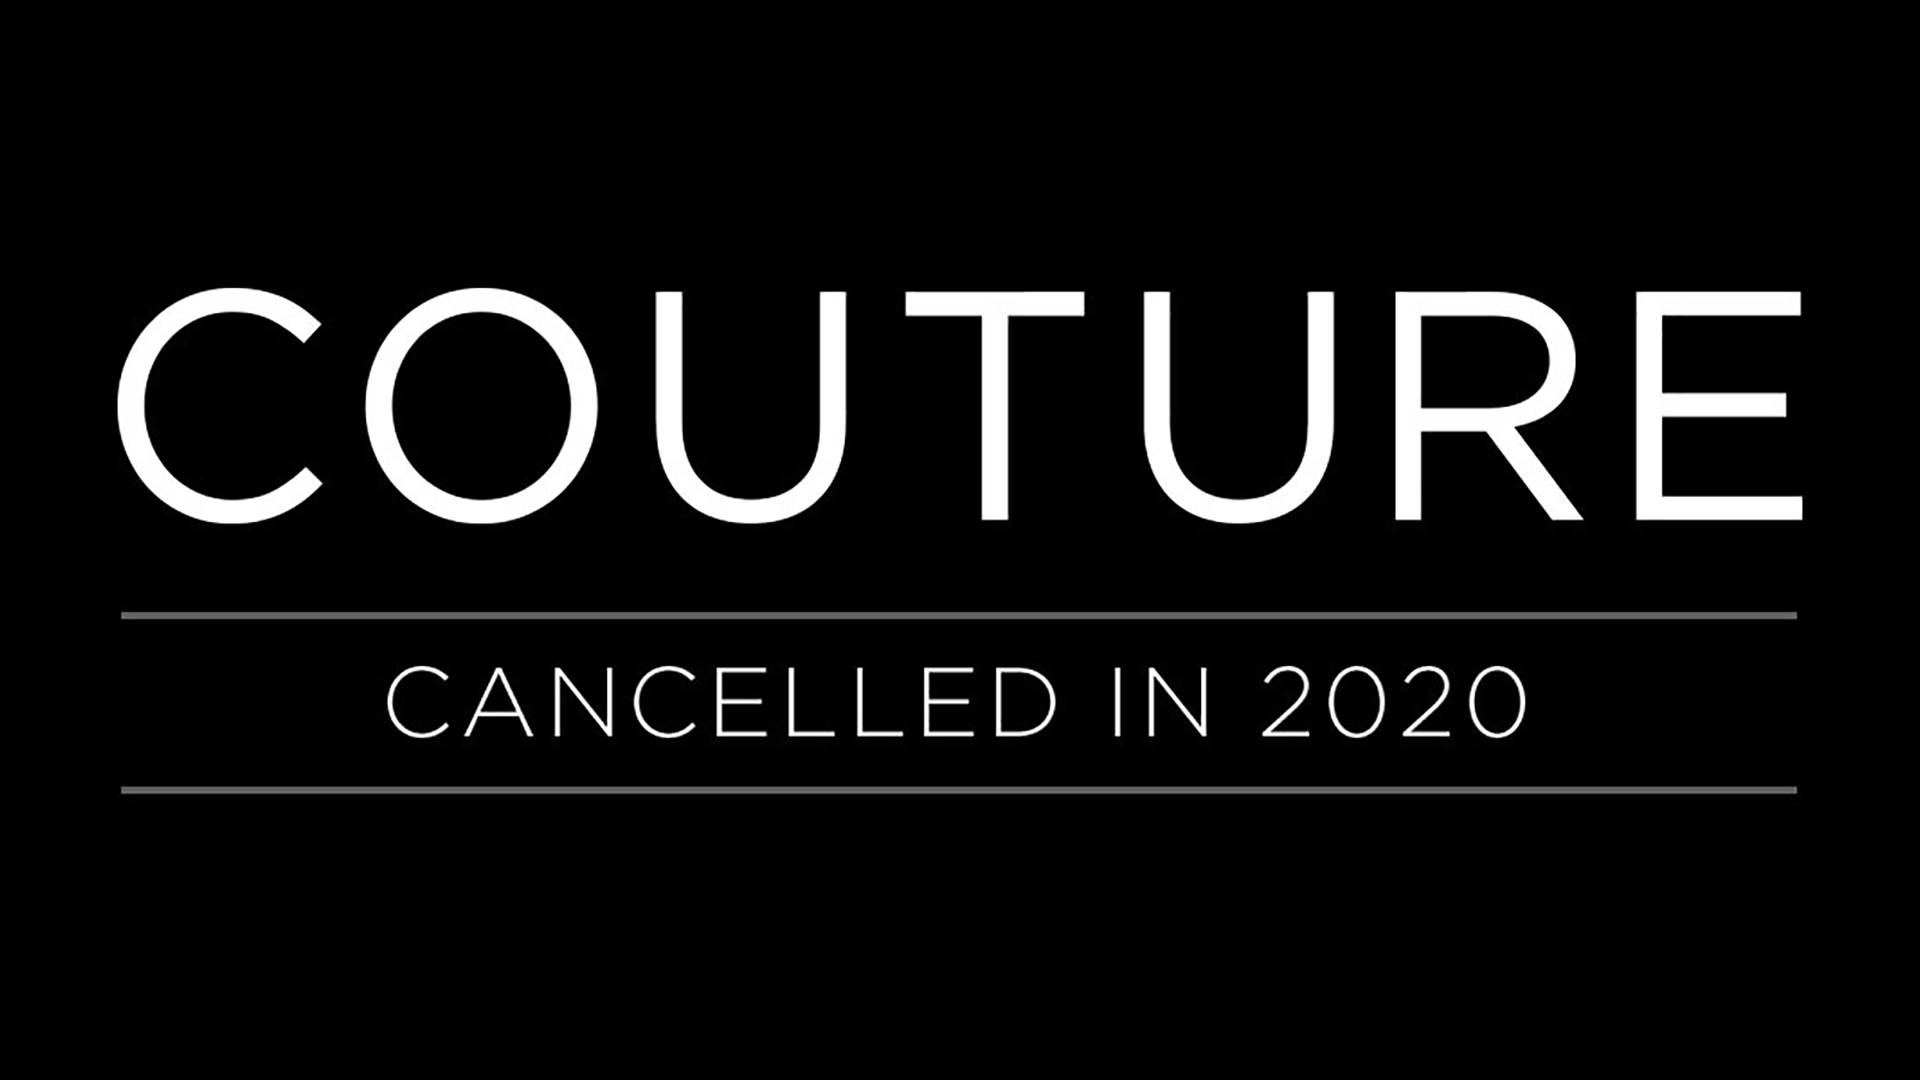 BREAKING NEWS: Couture Las Vegas 2020 Cancelled Due To COVID-19 Pandemic